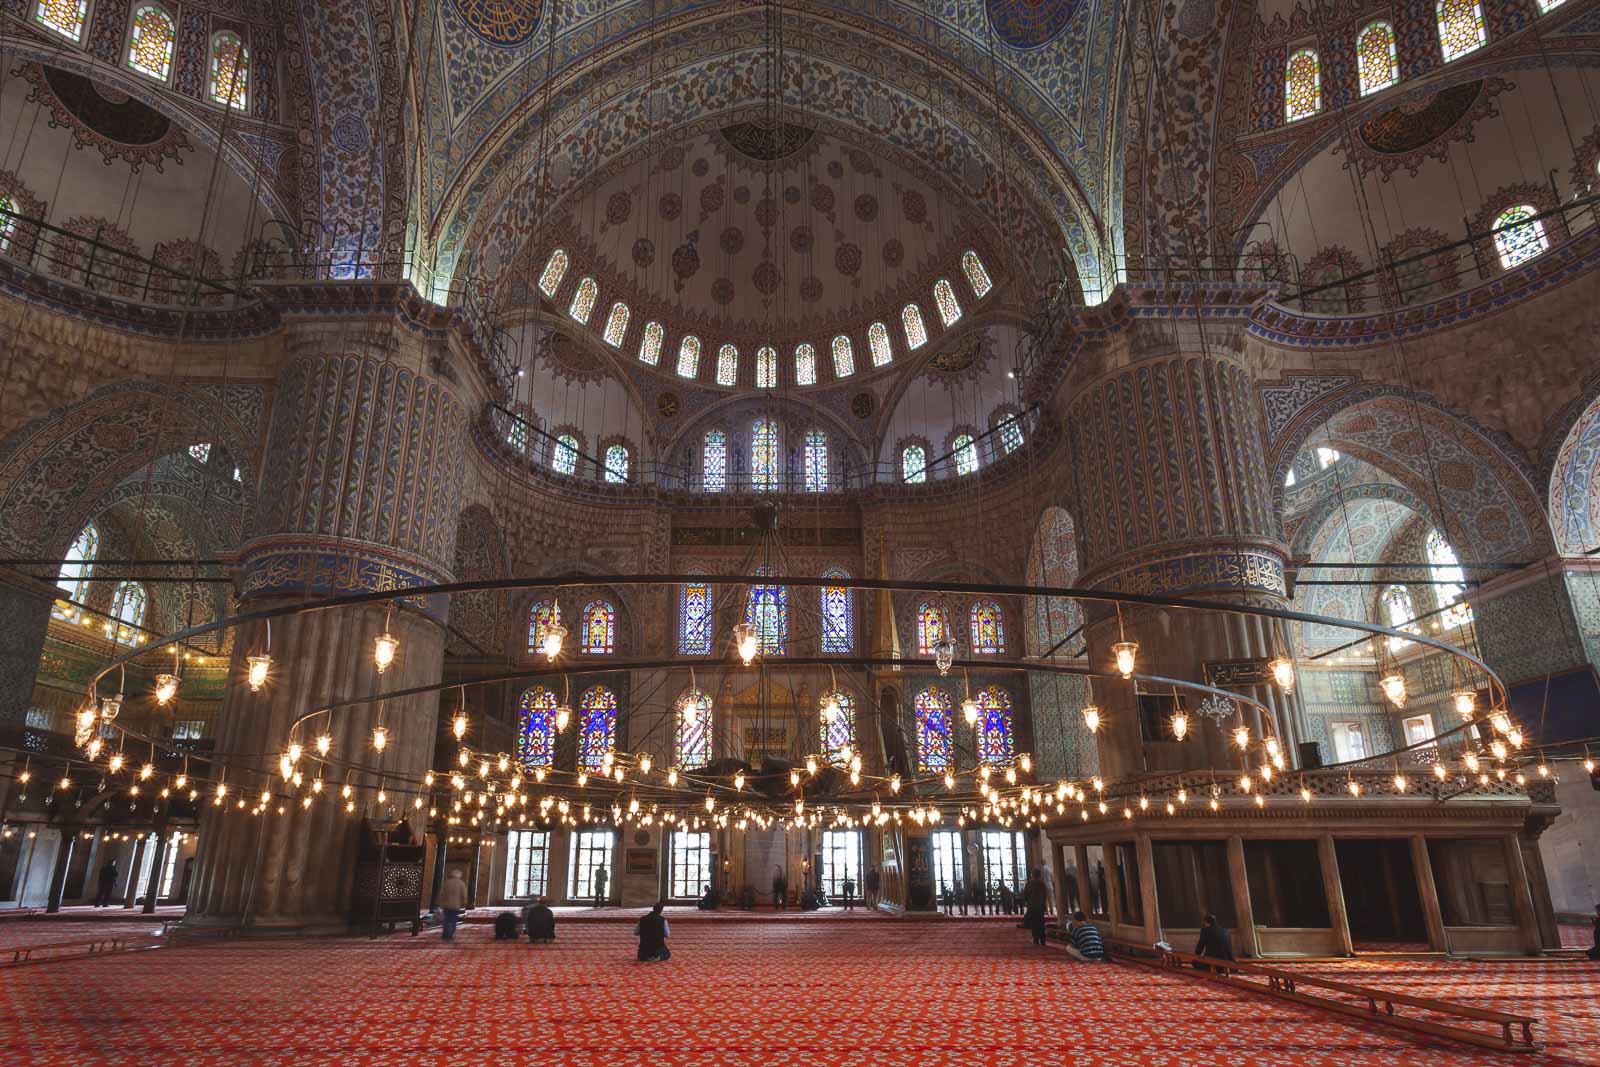 Tour inside the Blue Mosque Istanbul Turkey